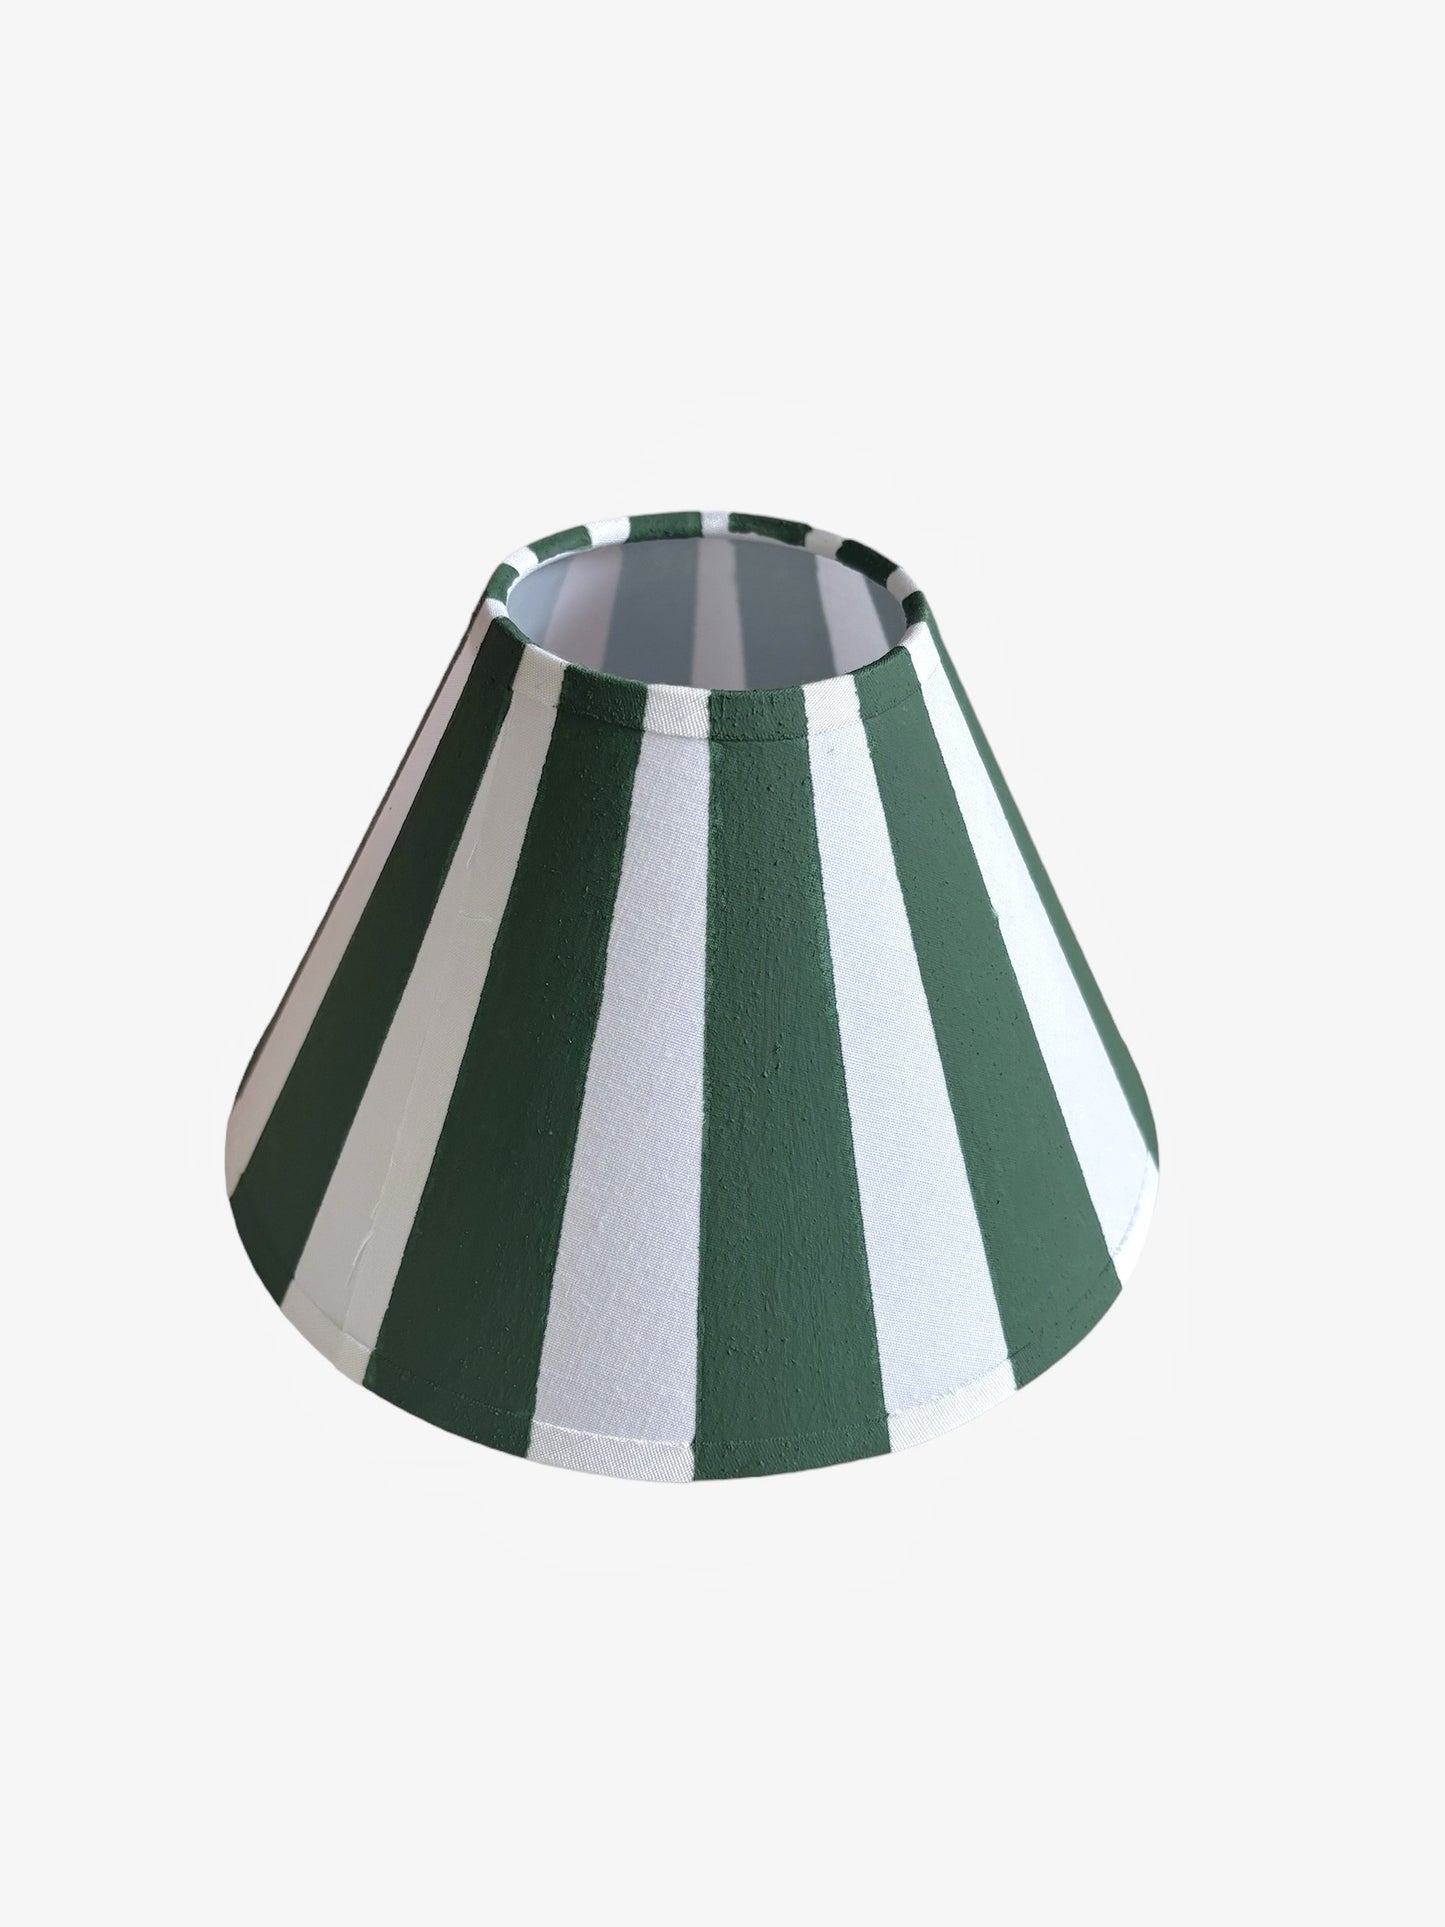 A hand-painted green and white candy striped lampshade